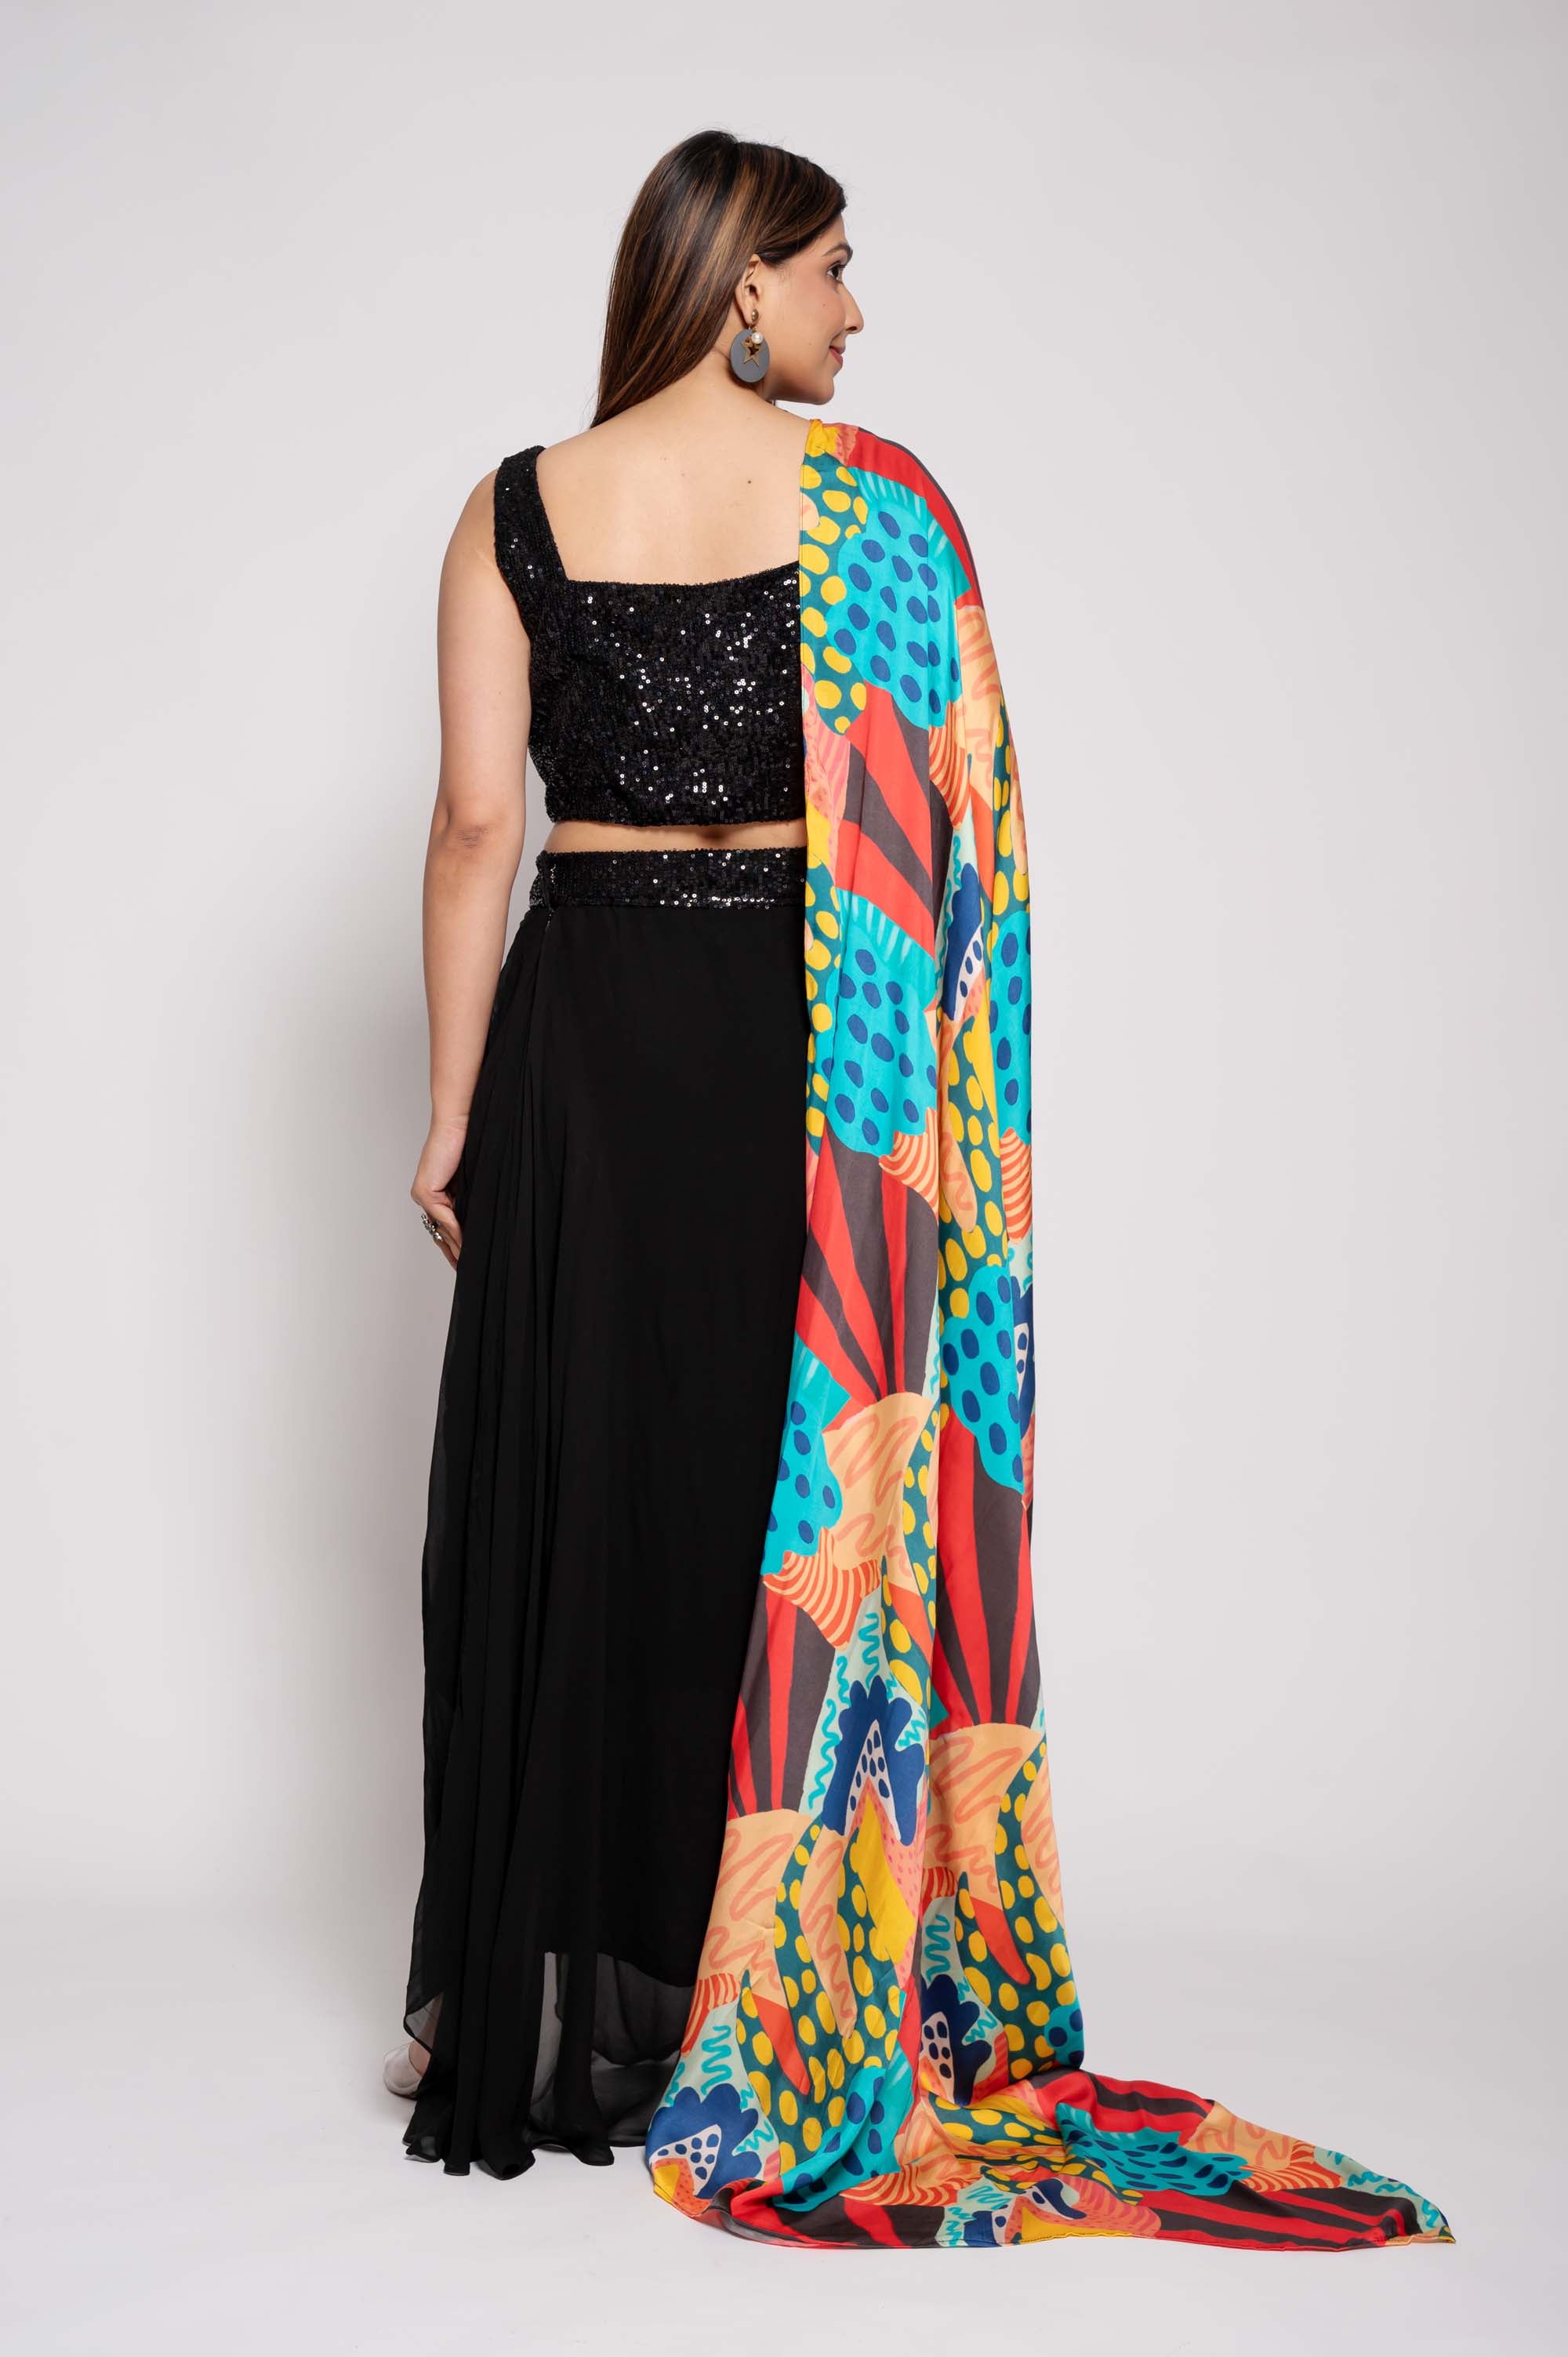 Saree Styled Party Wear